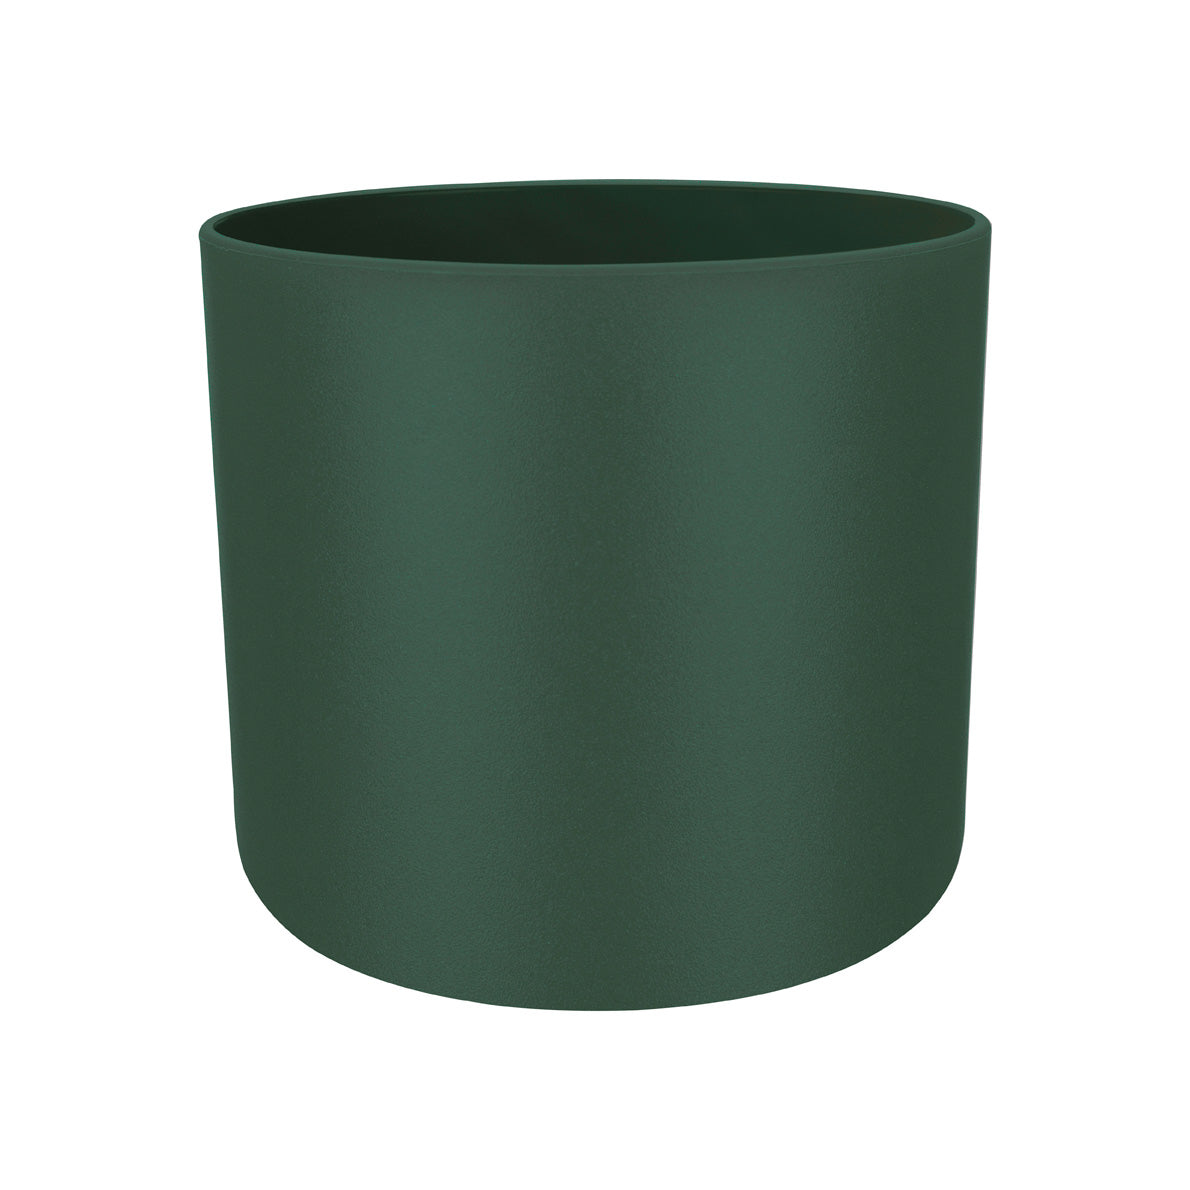 B.for Soft Cover Pot - 18cm - Green